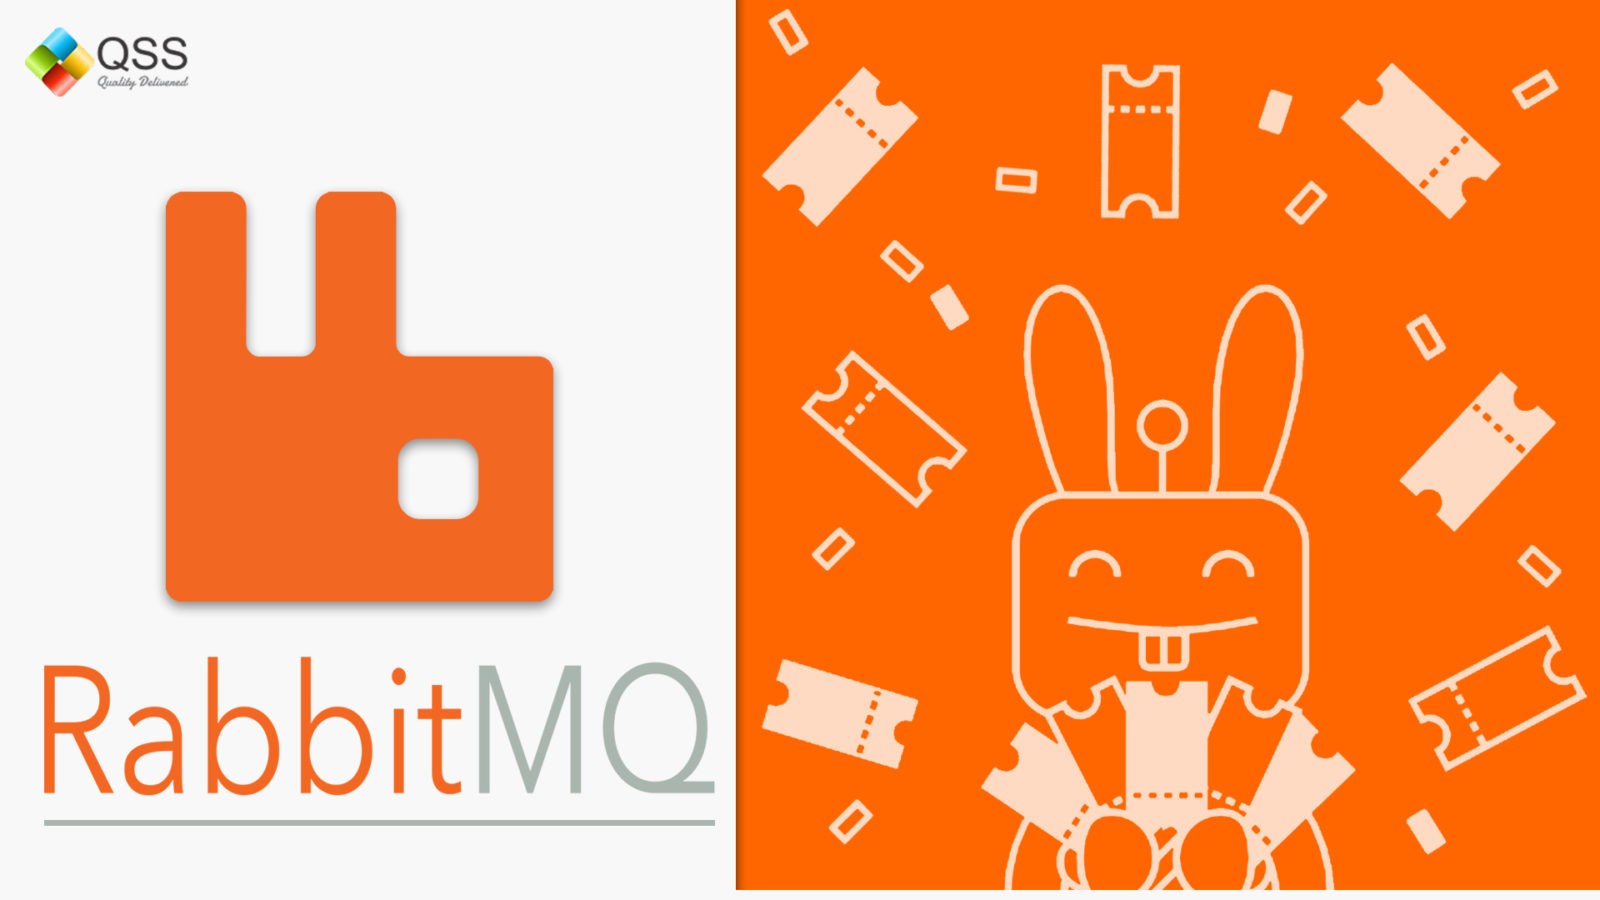 What is RabbitMQ